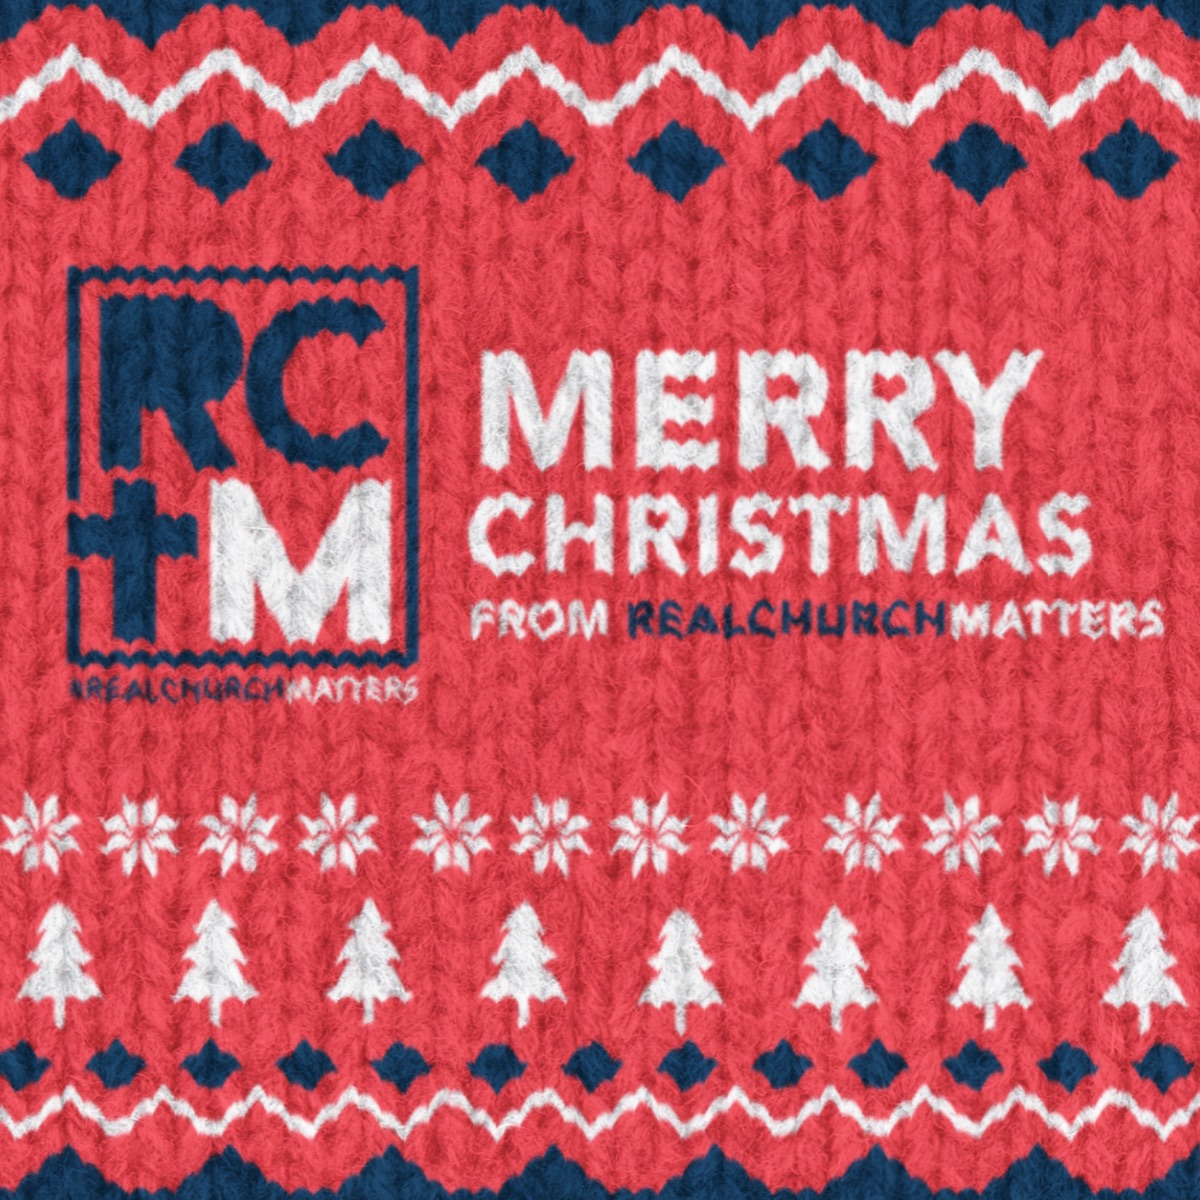 Day 1 of the 12 Days of Christmas with Real Church Matters